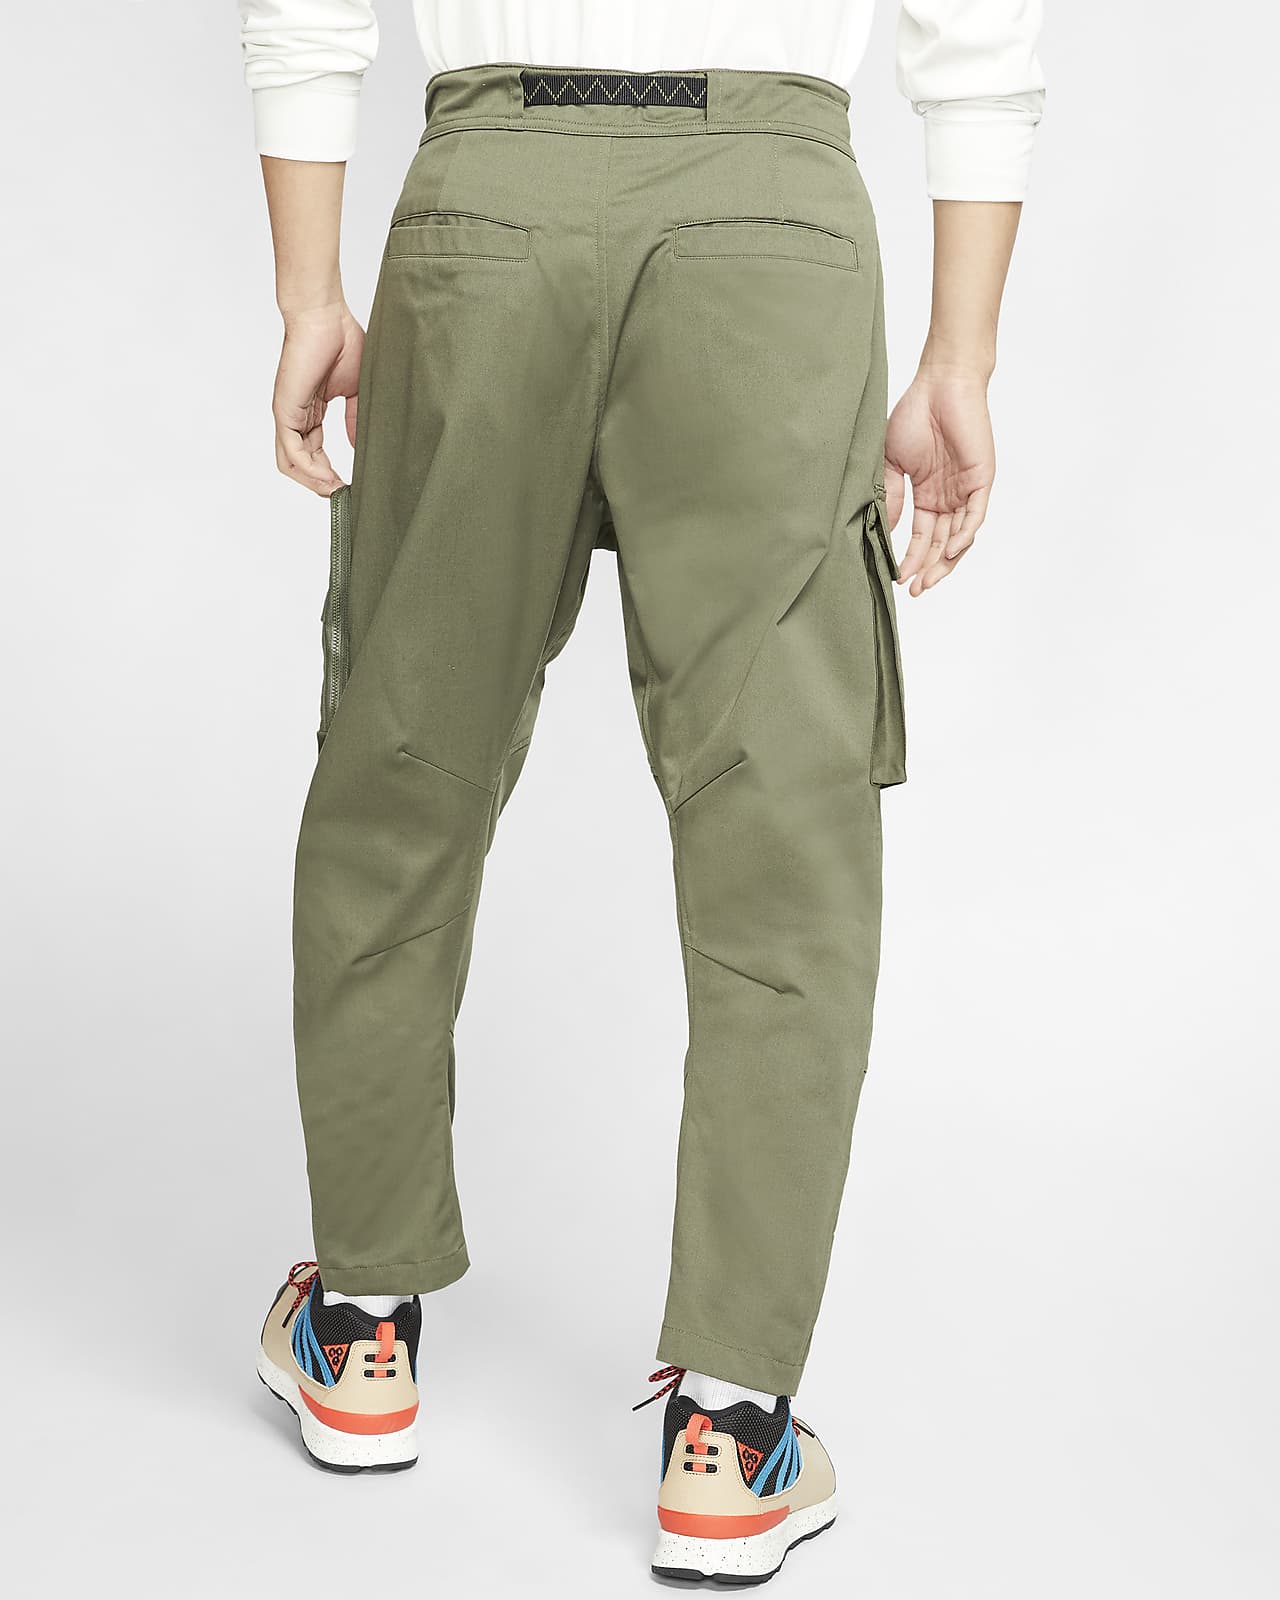 nike acg cargo pants for sale